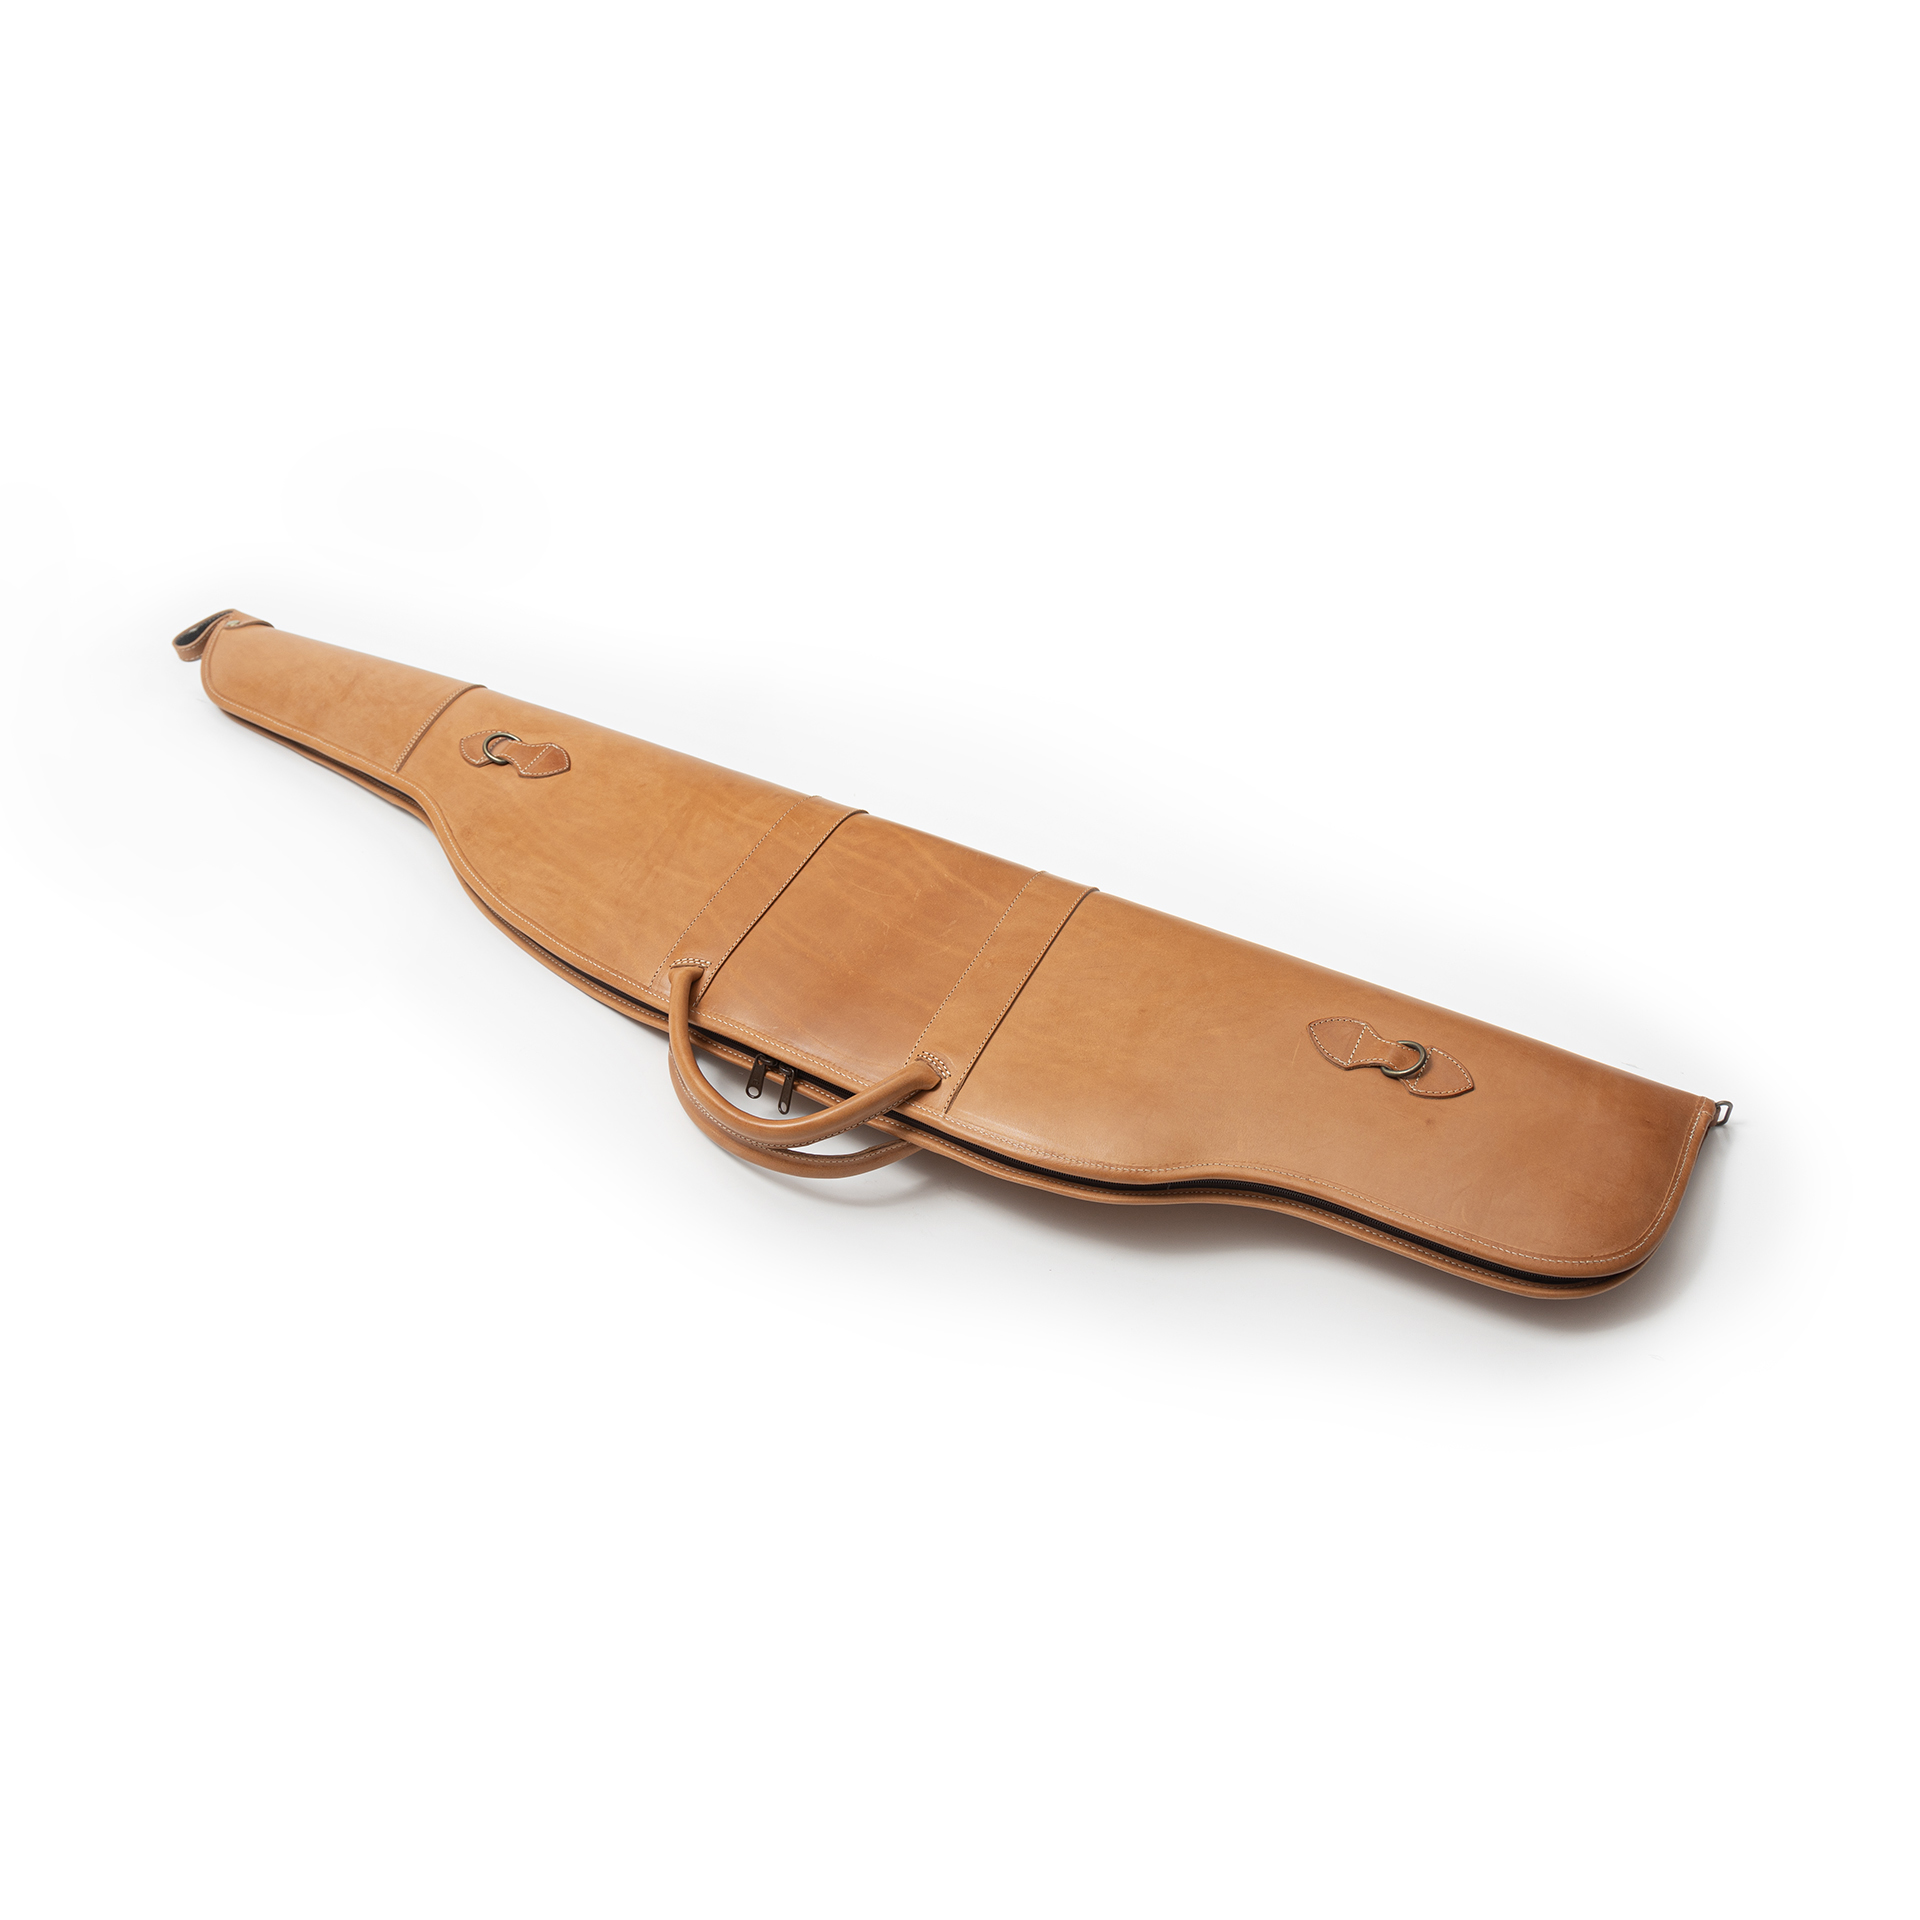 Rifle cover in genuine Italian leather – 32256-03